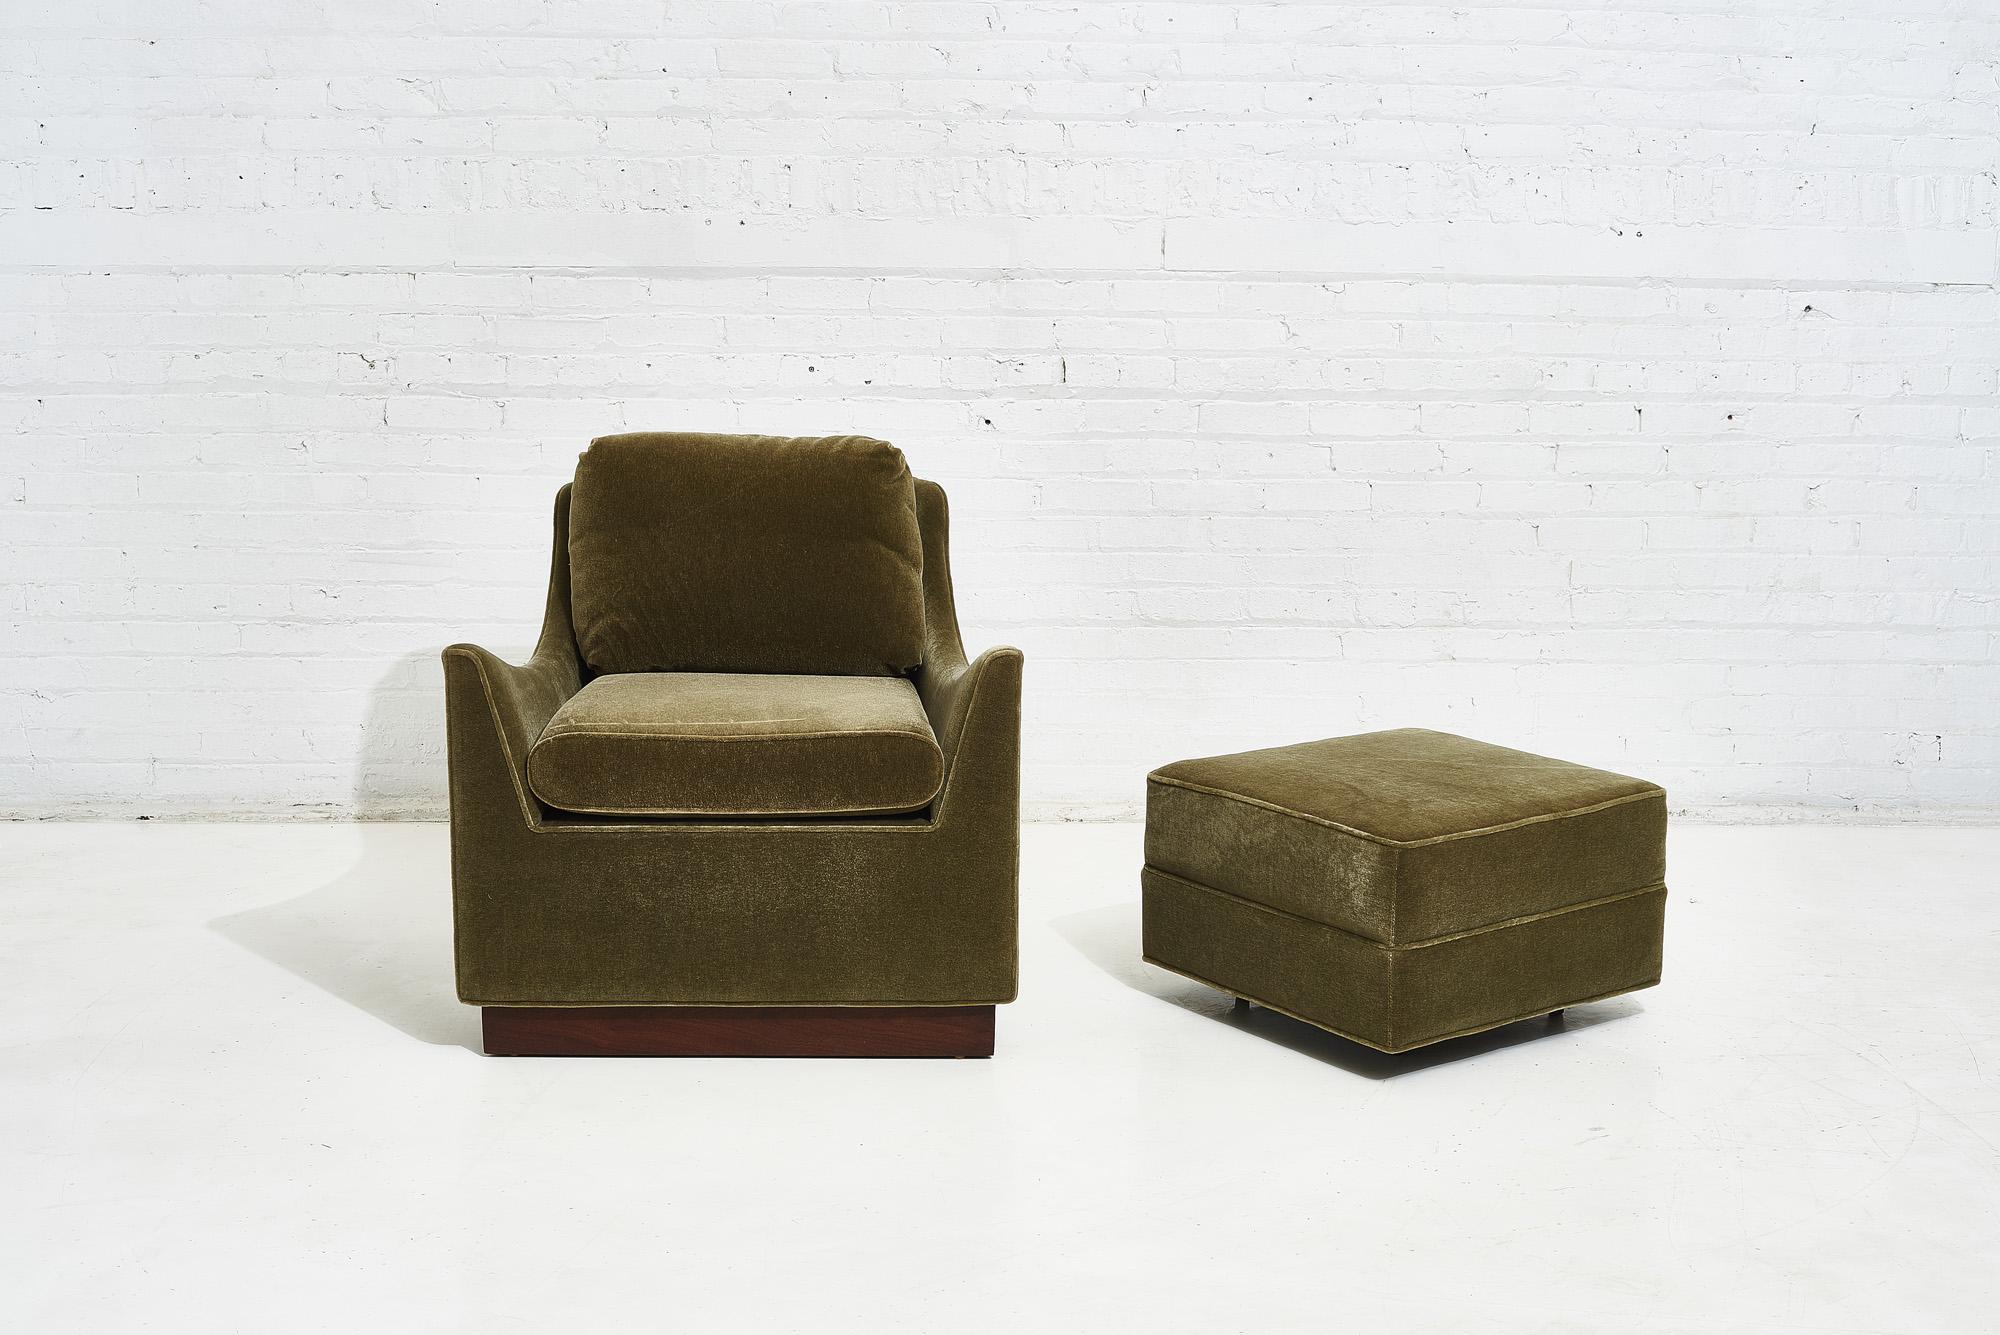 Milo Baughman lounge chair with ottoman, 1960’s. Recently reupholstered in green mohair. Milo Baughman by Thayer Coggin.